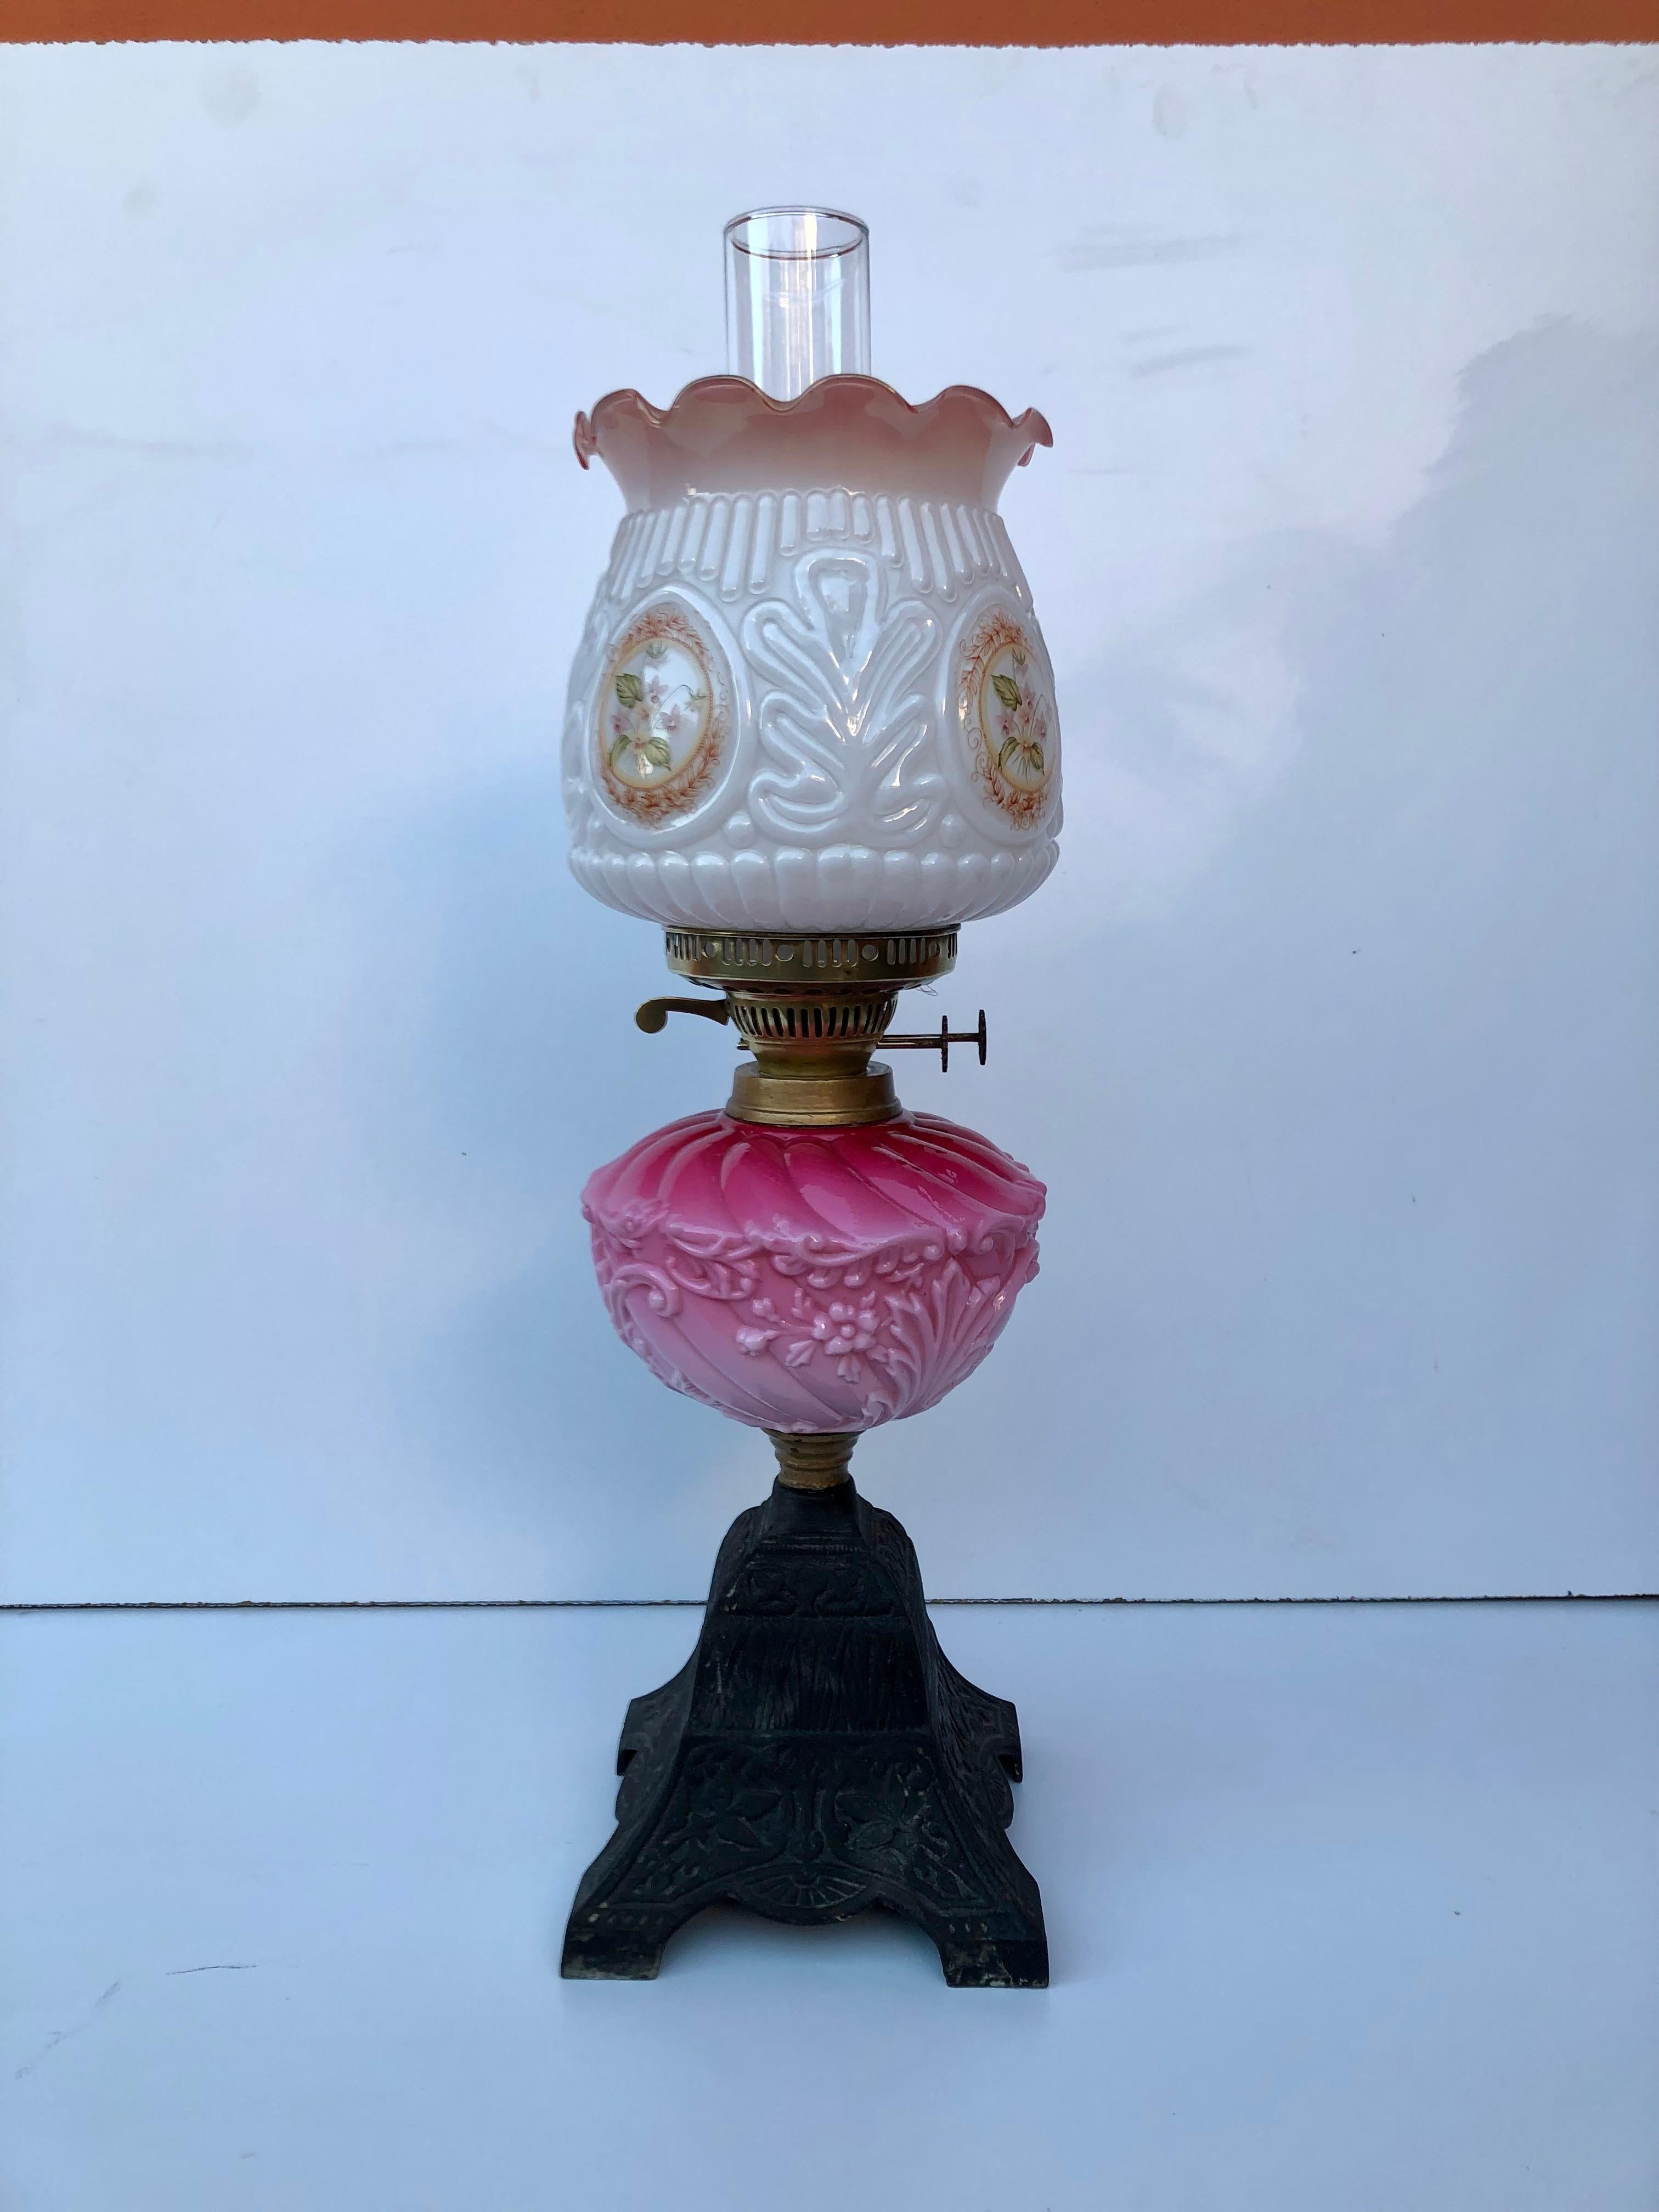 Victorian oil lamp with milk glass.
Fully working, with 2 burner.
Base is from iron metal.
Middle parts from milk glass.
Top parts hand painting on the glass shade.
 